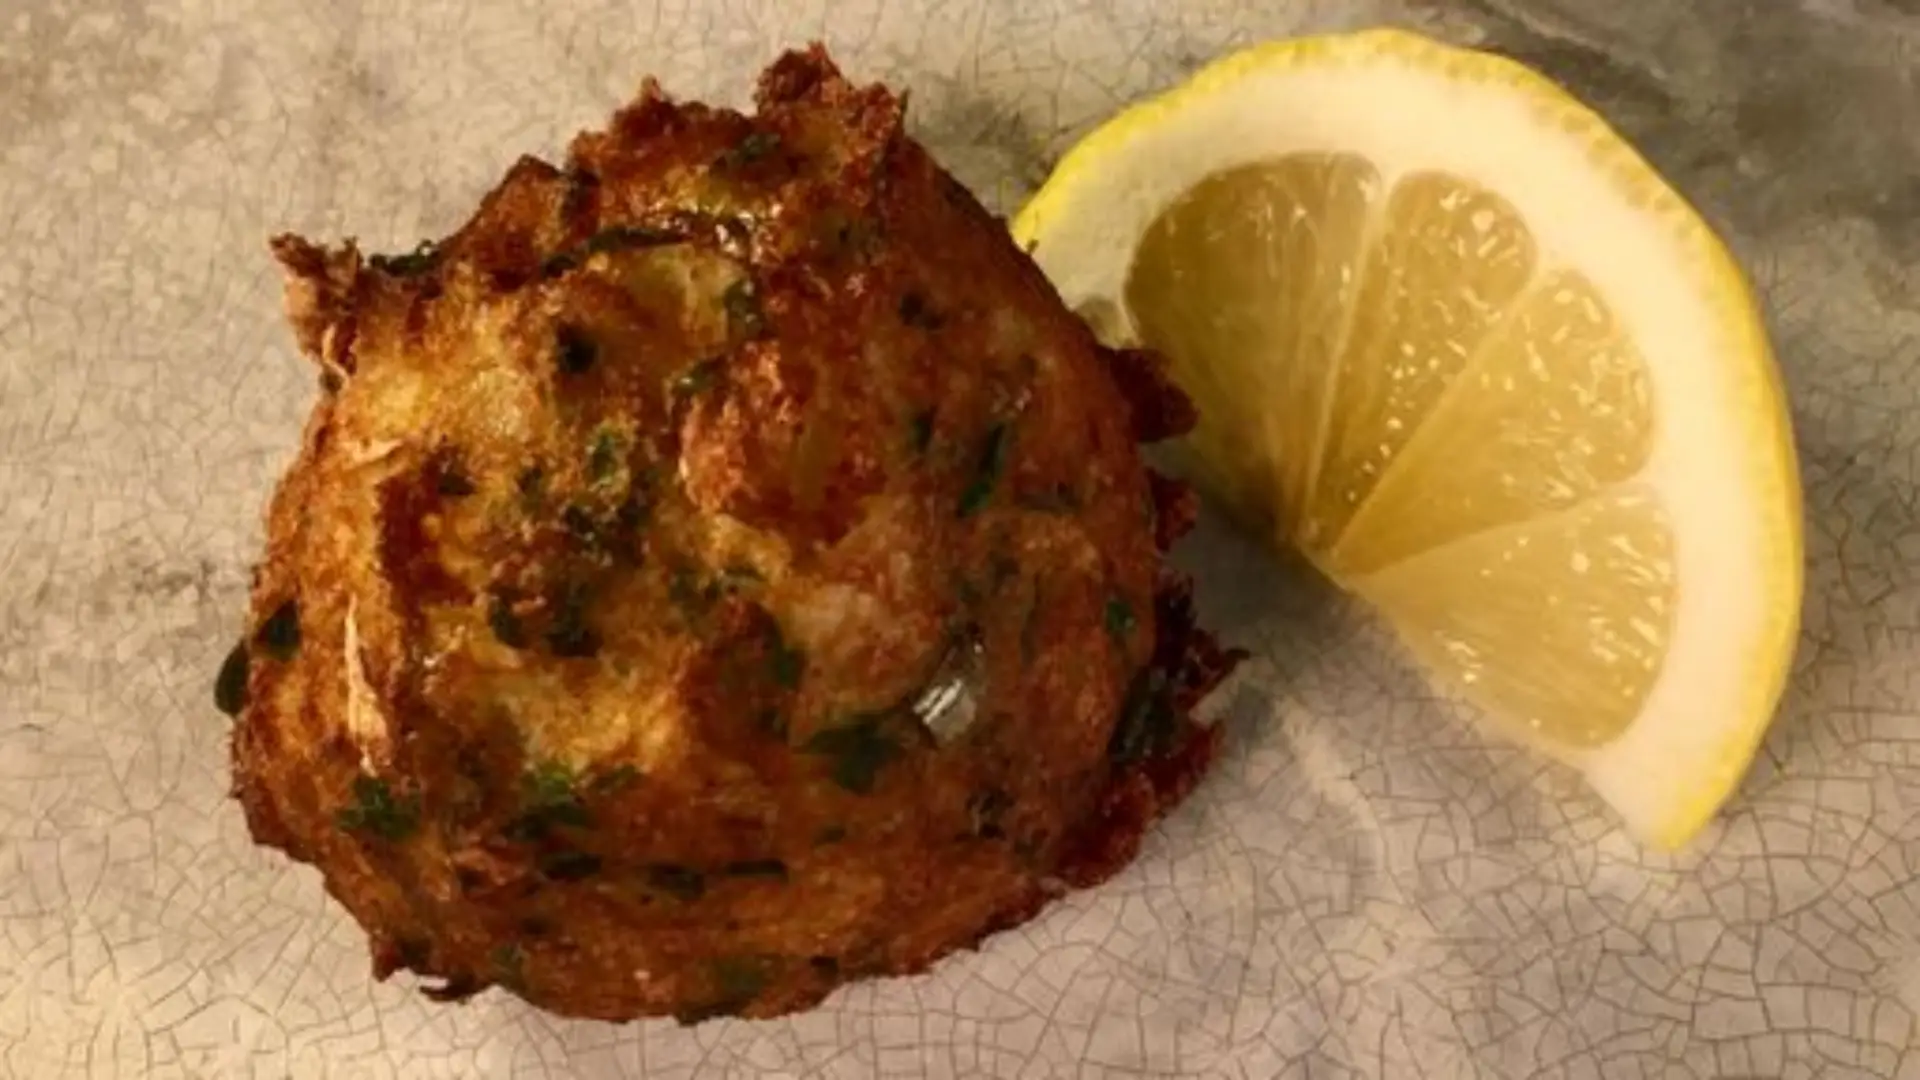 Portuguese salted codfish fritter by Carla hall